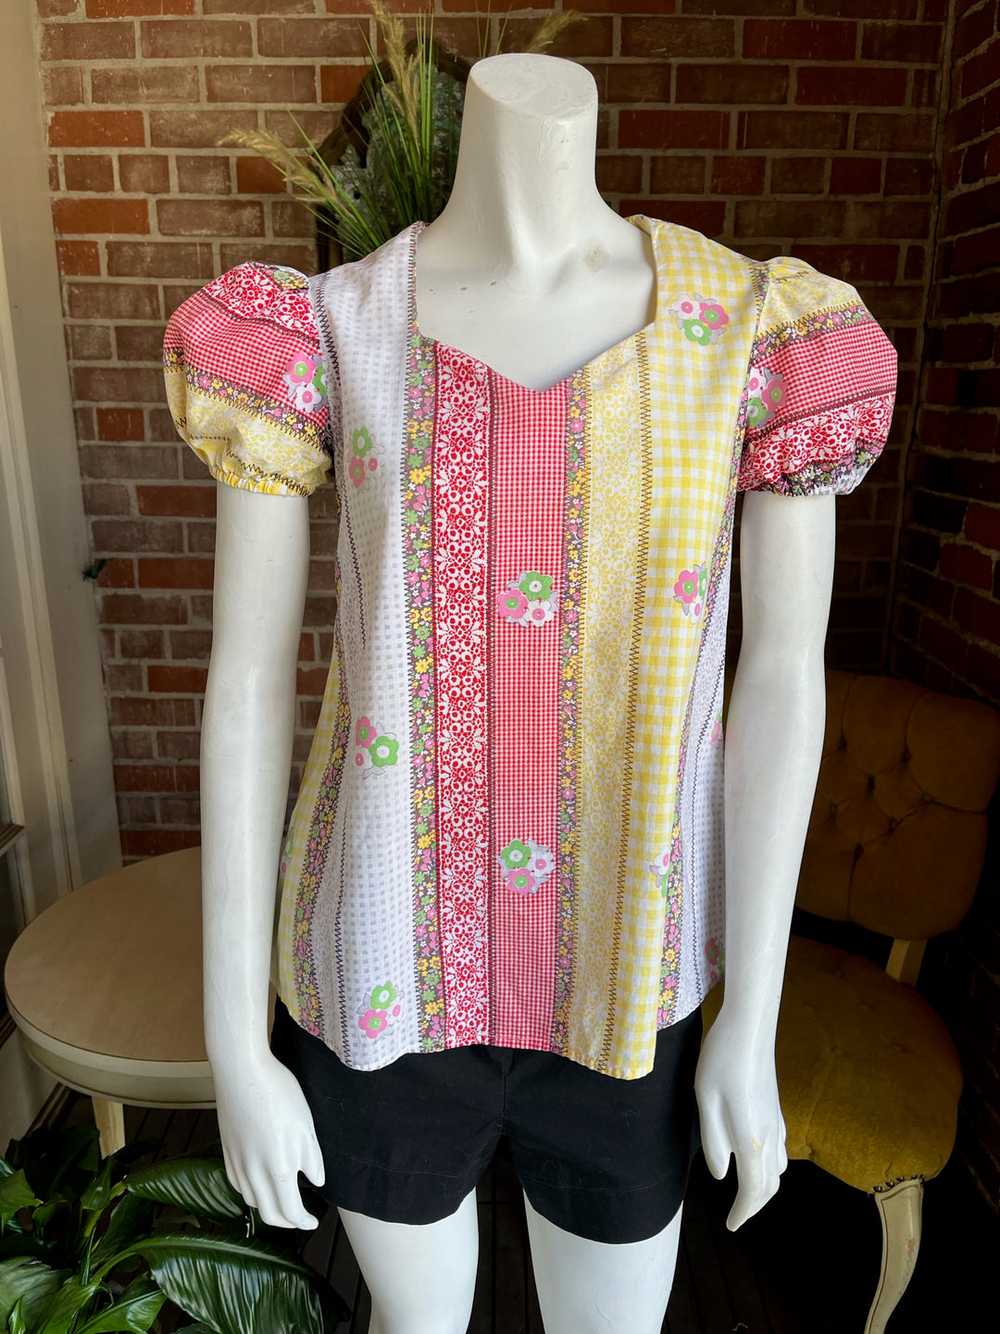 1970s Patchwork Novelty Top - image 2